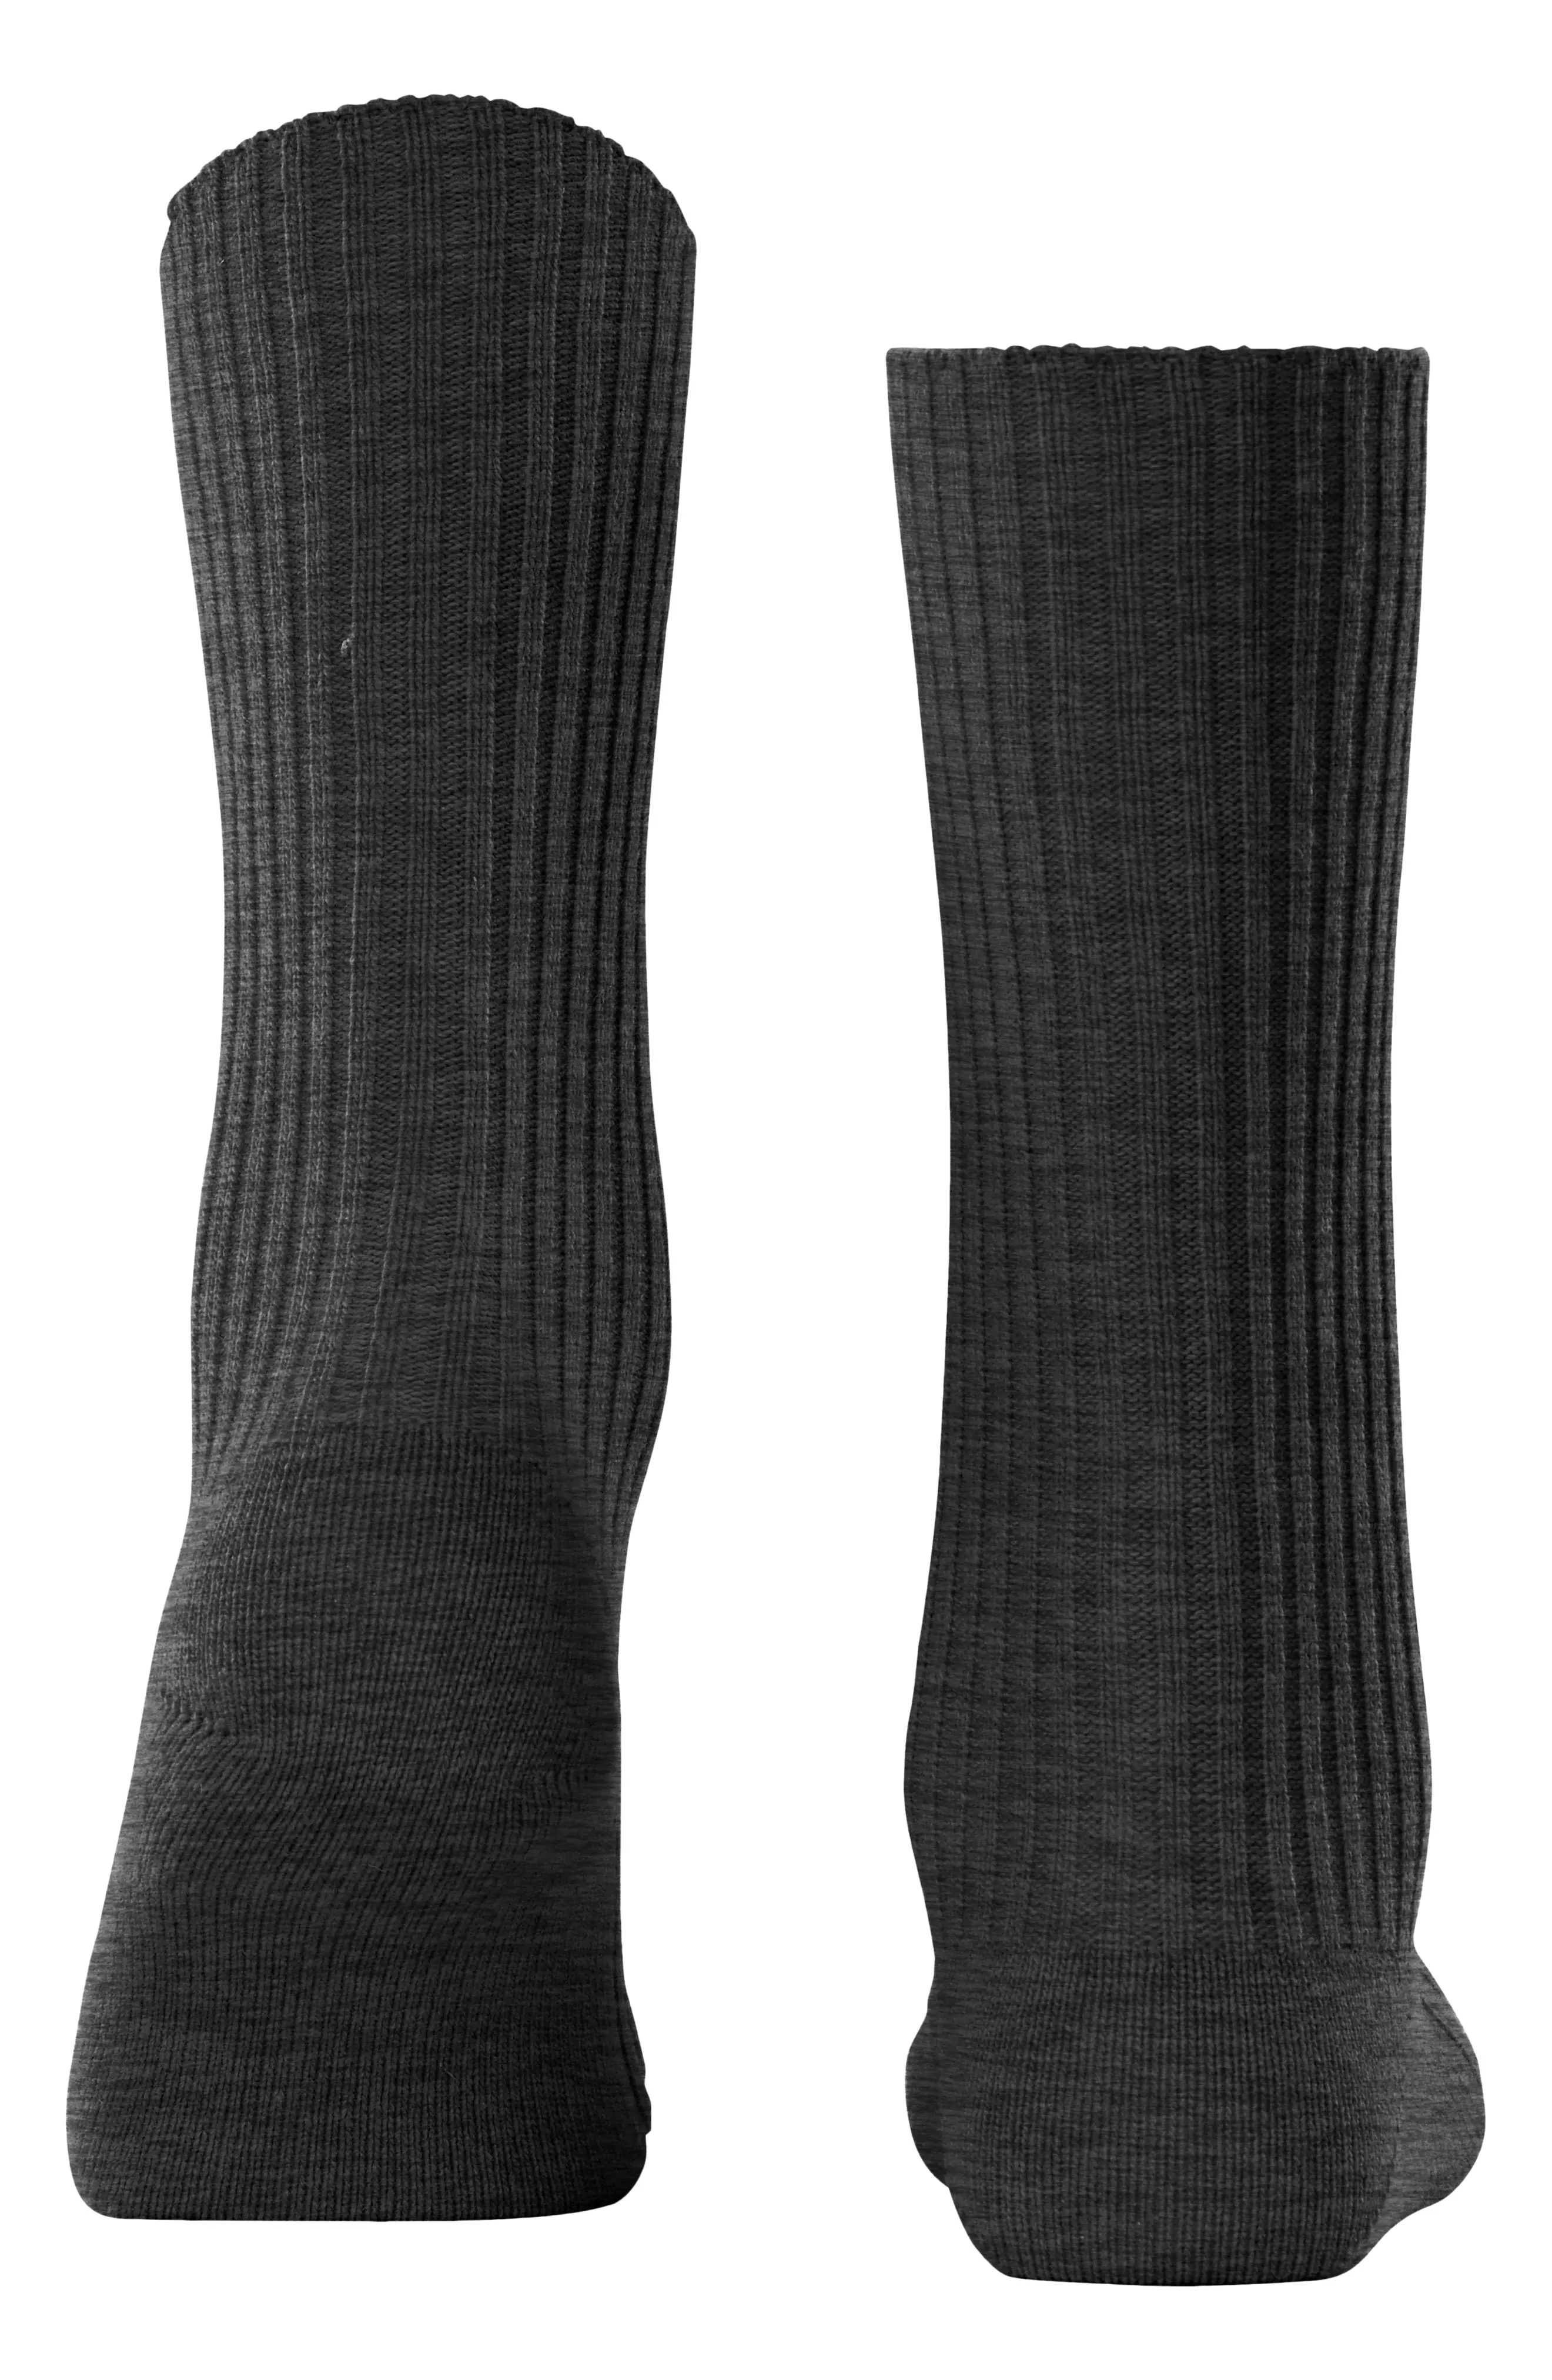 Cosy Wool Blend Boot Socks in Anthra. mel - 2